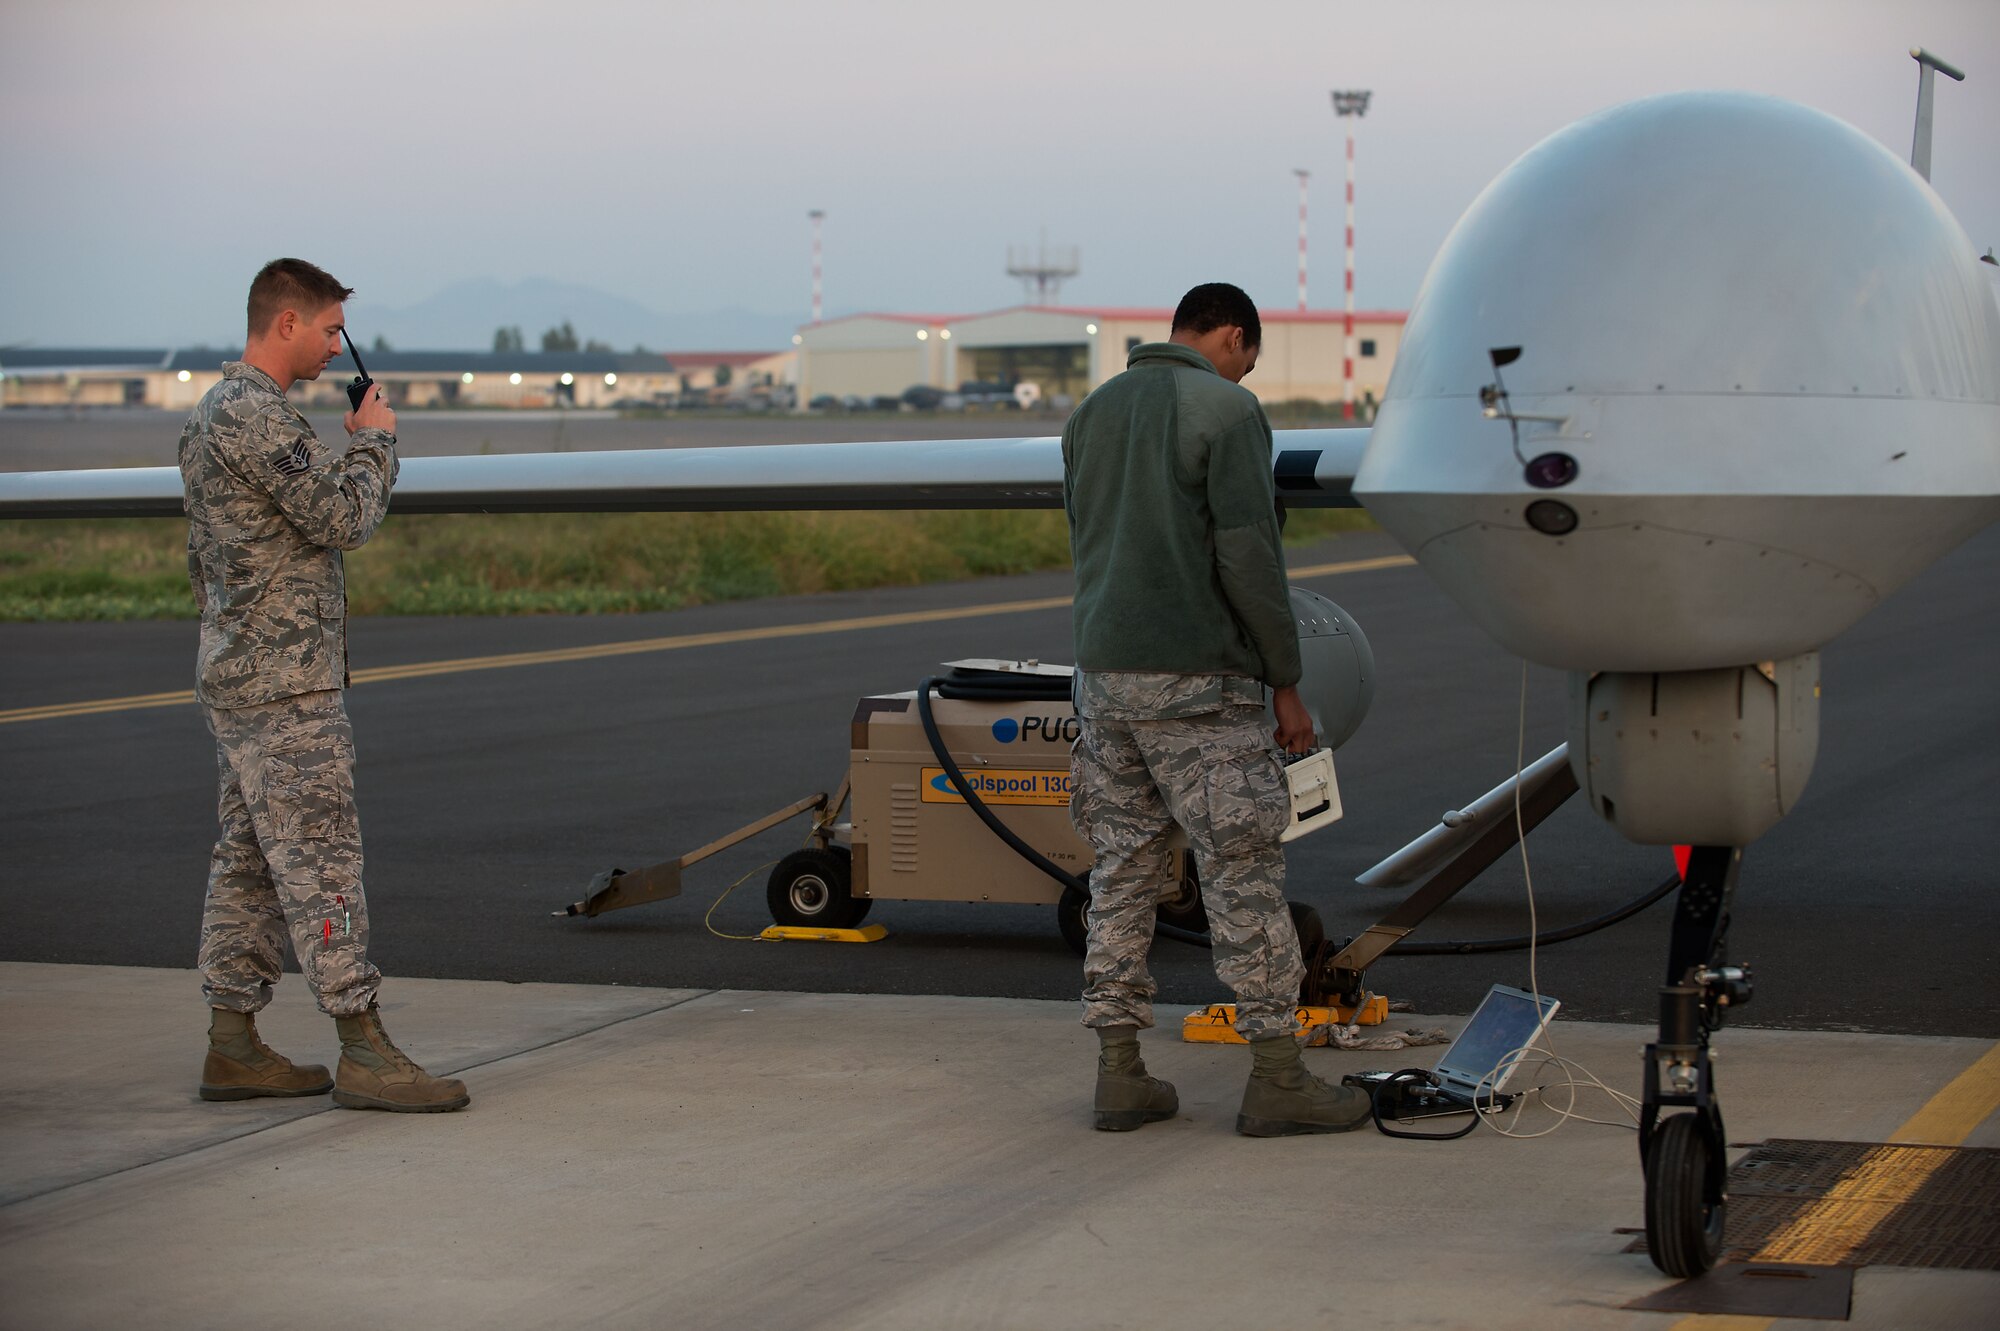 Airmen attached to the 324th Expeditionary Reconnaissance Squadron perform a preflight inspection on an MQ-1 Predator unmanned aerial vehicle Oct. 22, 2013. (U.S. Navy photo/Mass Communication Specialist 2nd Class Brian T. Glunt)